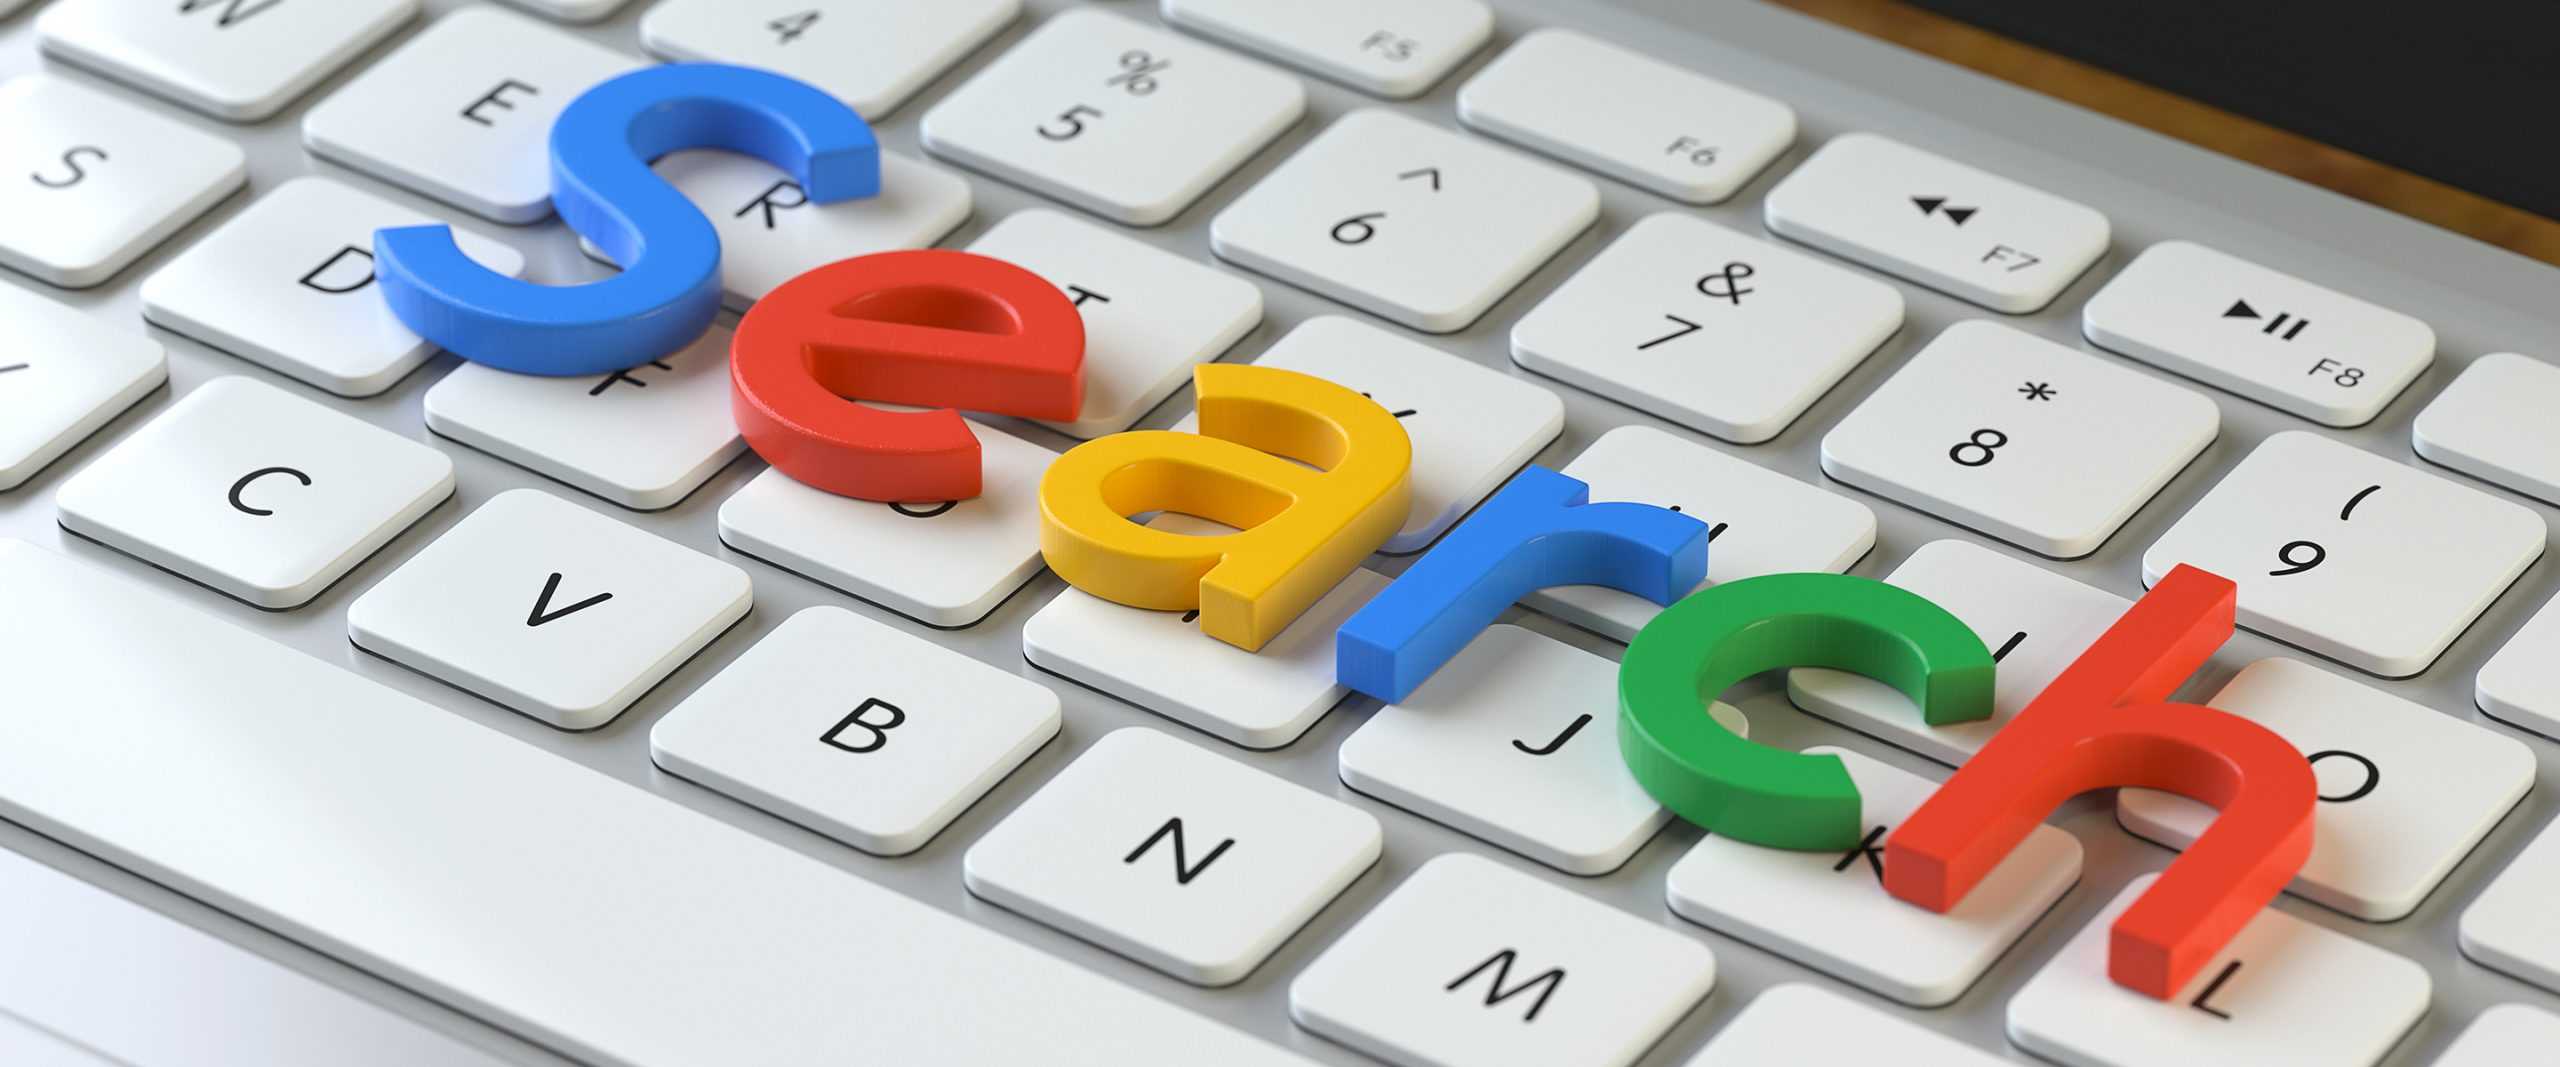 A significant drop in spending attributed to Googles&#8217; search queries